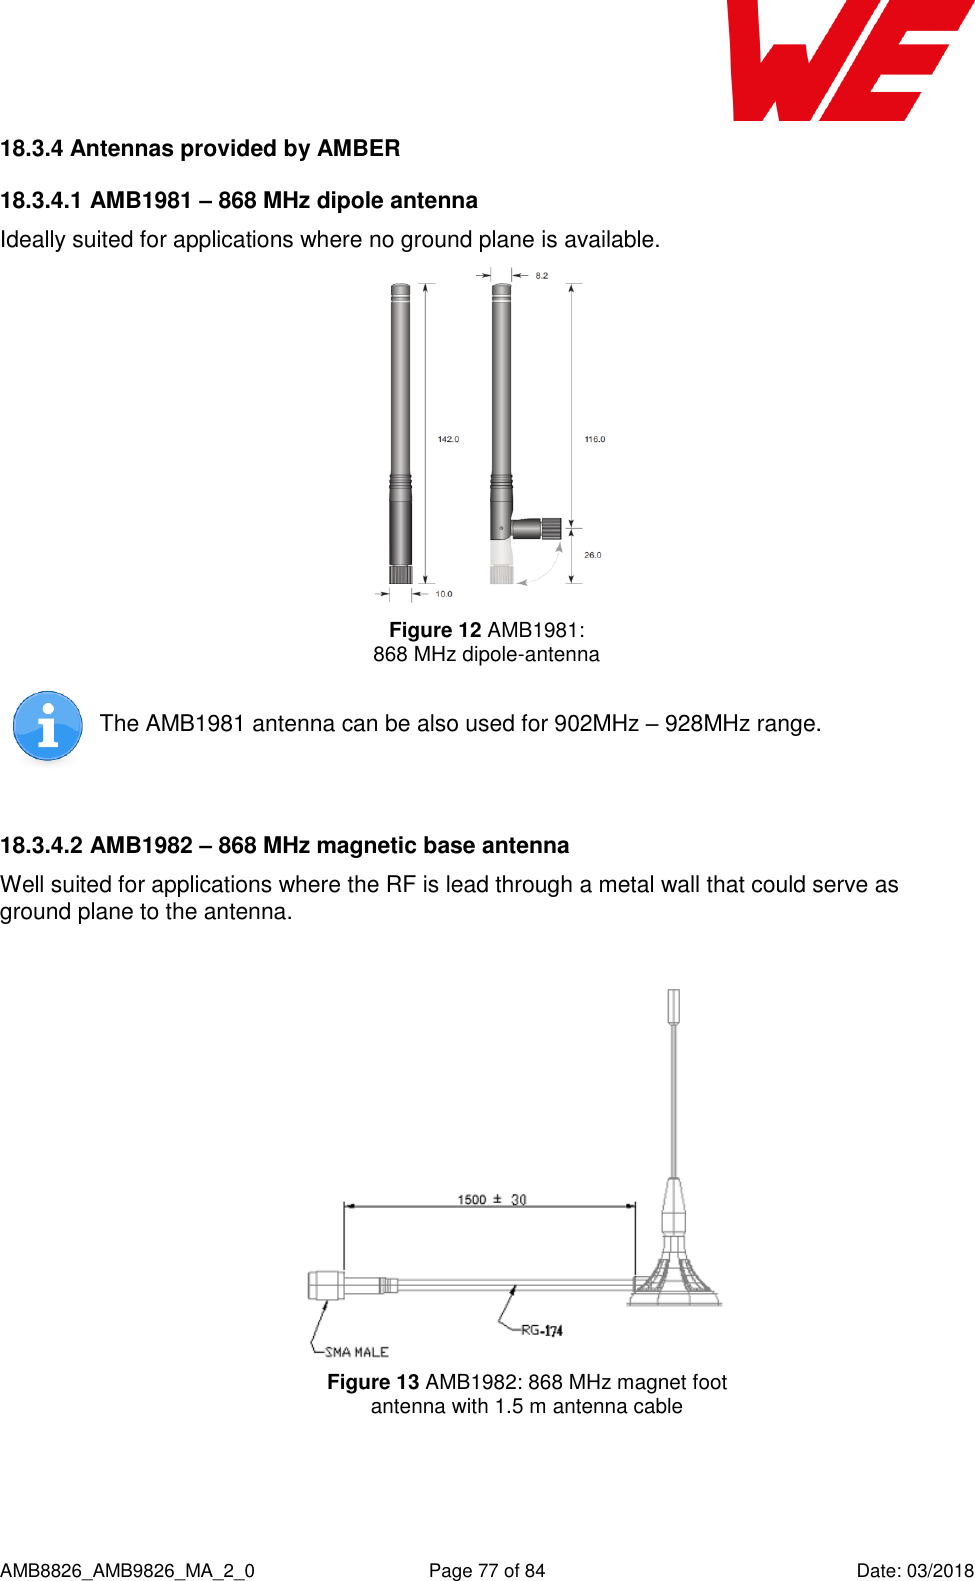      AMB8826_AMB9826_MA_2_0  Page 77 of 84  Date: 03/2018 18.3.4 Antennas provided by AMBER 18.3.4.1 AMB1981 – 868 MHz dipole antenna Ideally suited for applications where no ground plane is available.  Figure 12 AMB1981: 868 MHz dipole-antenna  The AMB1981 antenna can be also used for 902MHz – 928MHz range.   18.3.4.2 AMB1982 – 868 MHz magnetic base antenna  Well suited for applications where the RF is lead through a metal wall that could serve as ground plane to the antenna.     Figure 13 AMB1982: 868 MHz magnet foot  antenna with 1.5 m antenna cable  